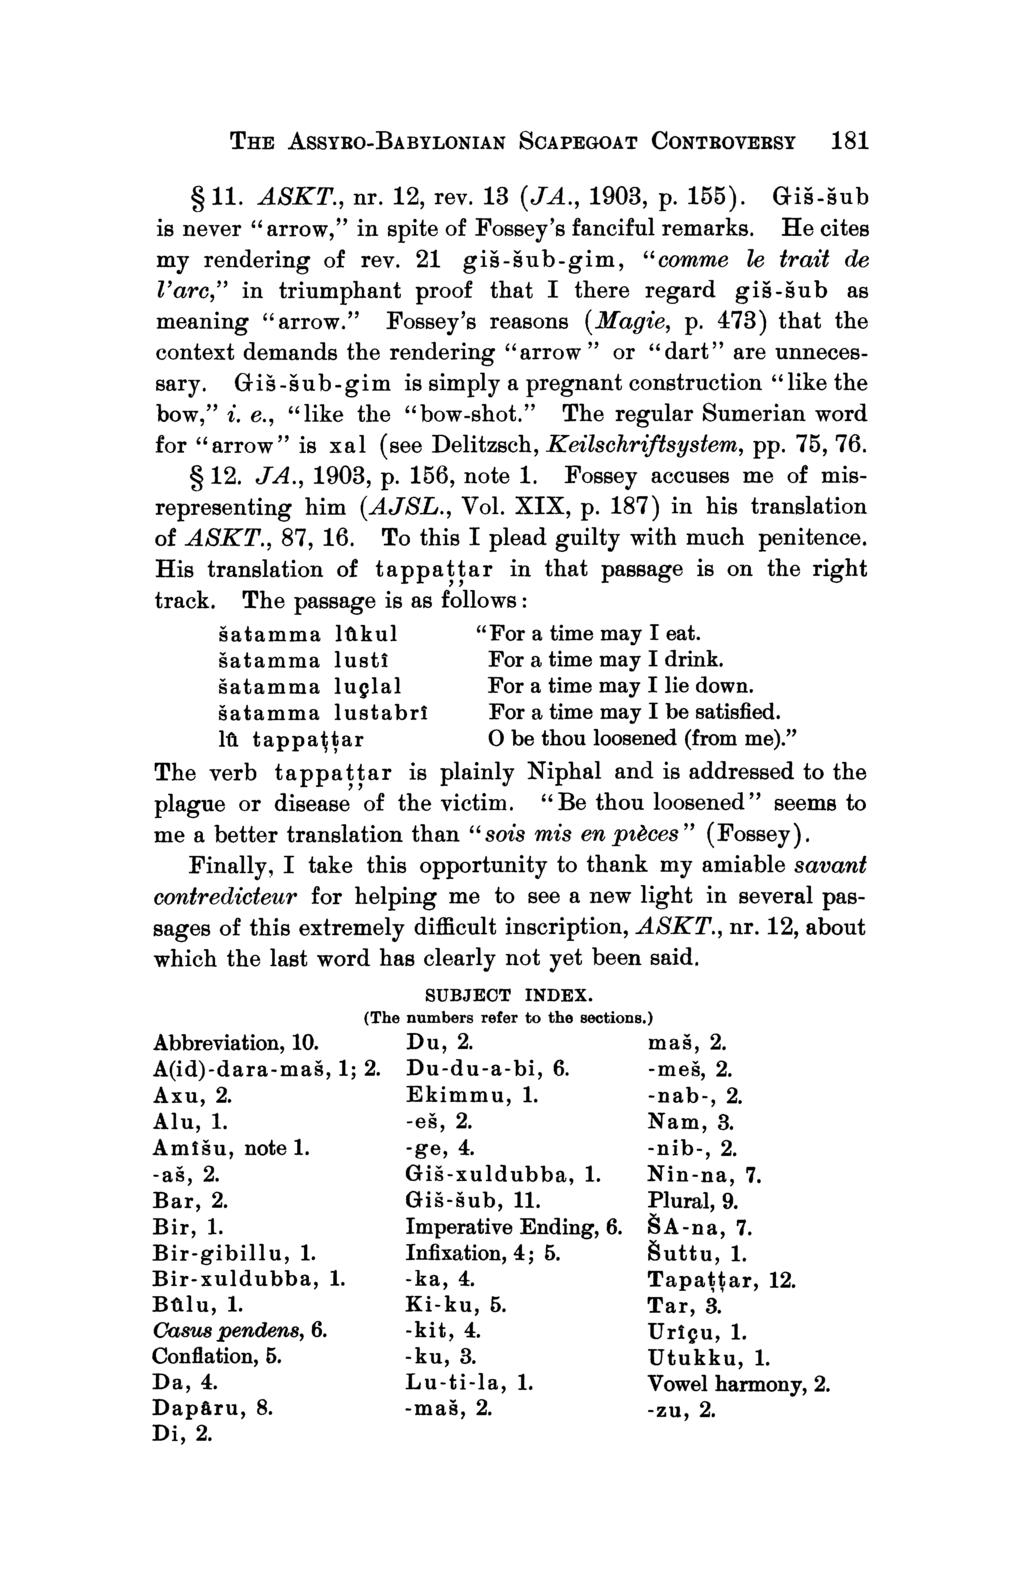 T:E[E ASSYRO-BABYLONIAN SCAPEG OAT CONTROVERSY 181 11. ASKT., nr. 12, rev. 13 (JA., 1903, p. 155). GEis-sub is never " arrow," in spite of Fossey's fanciful remarks. He cites my rendering of rev.